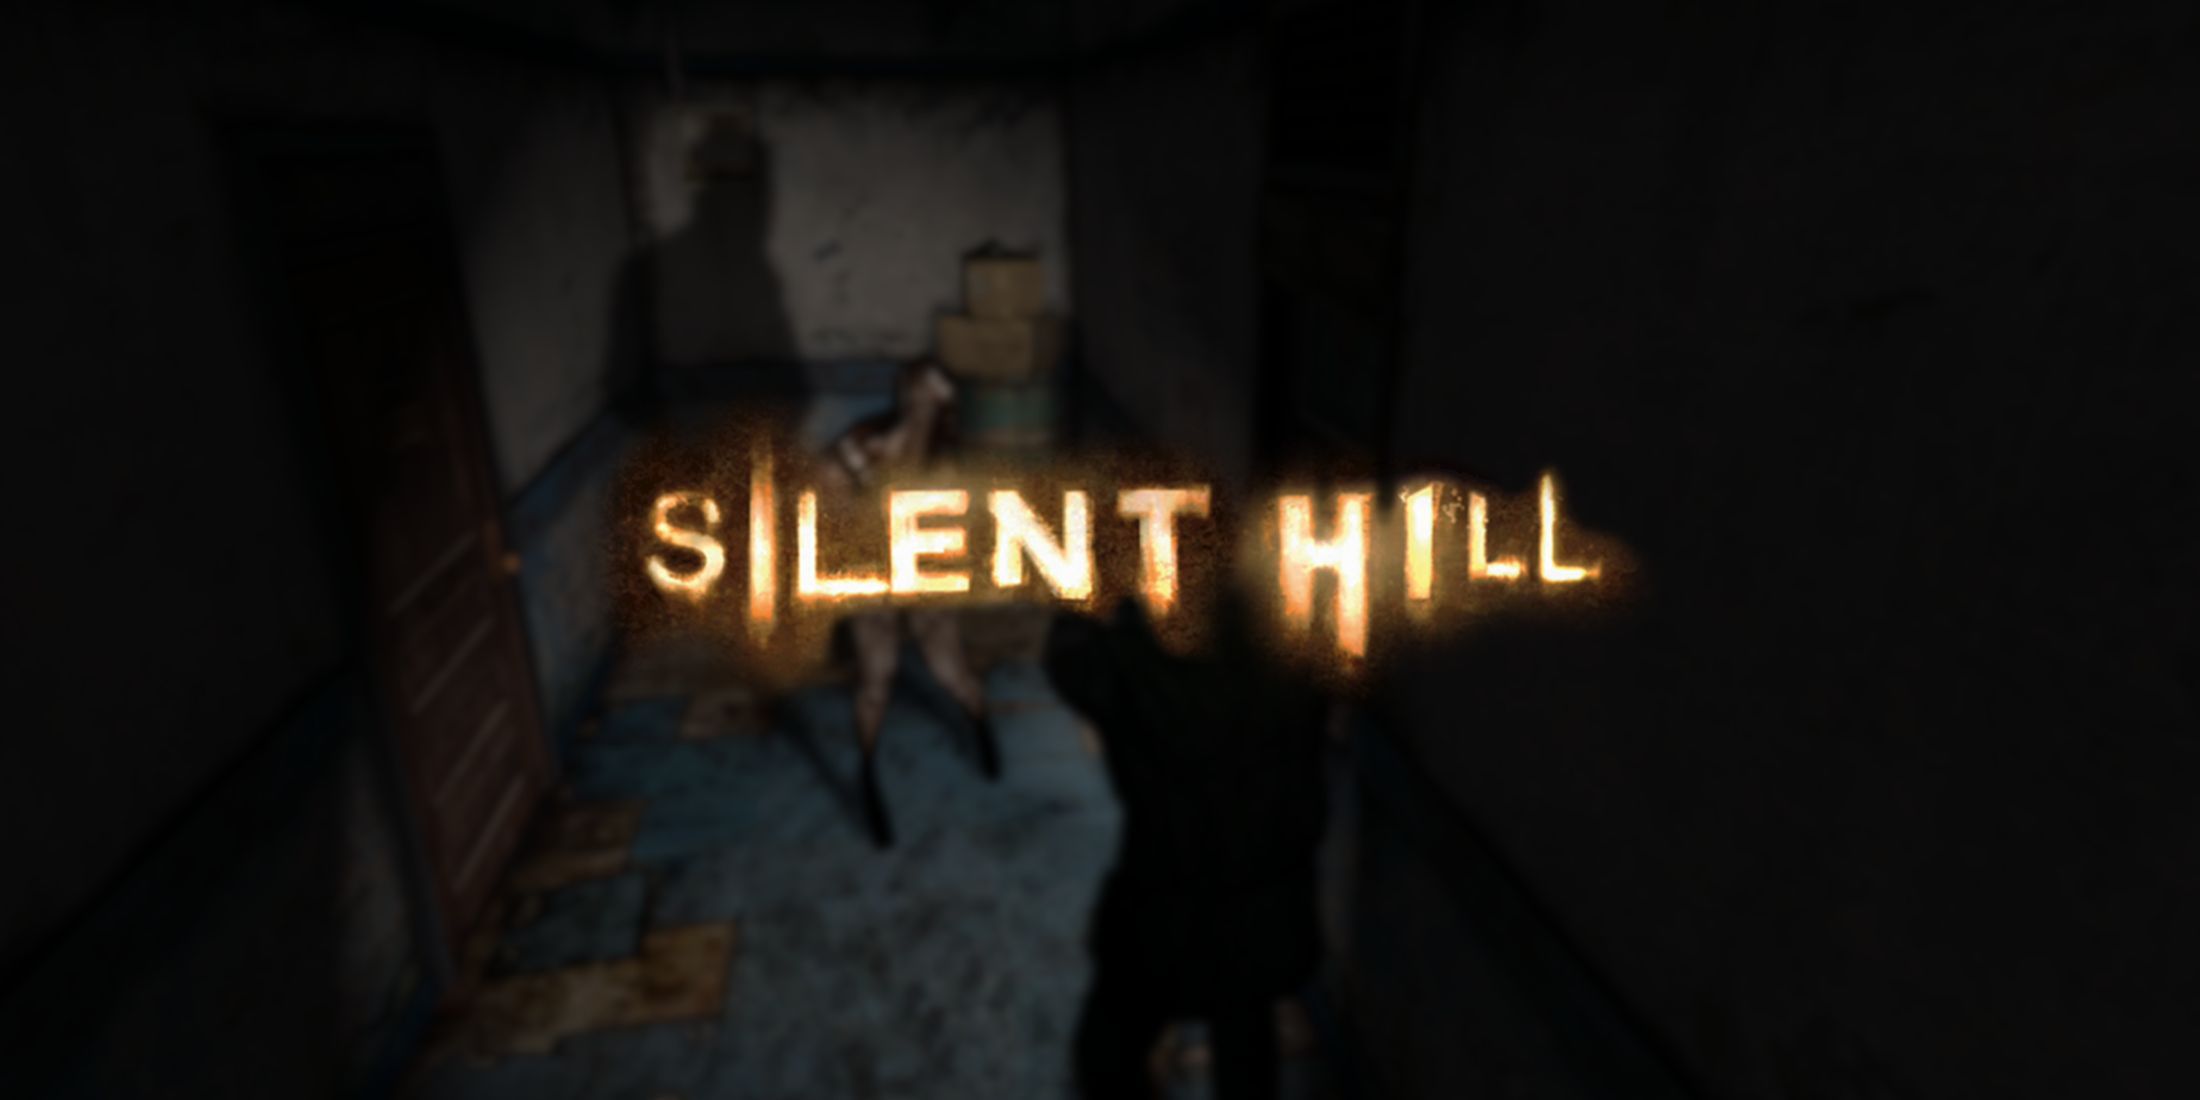 silent hill logo on a blury background from silent hill 2.